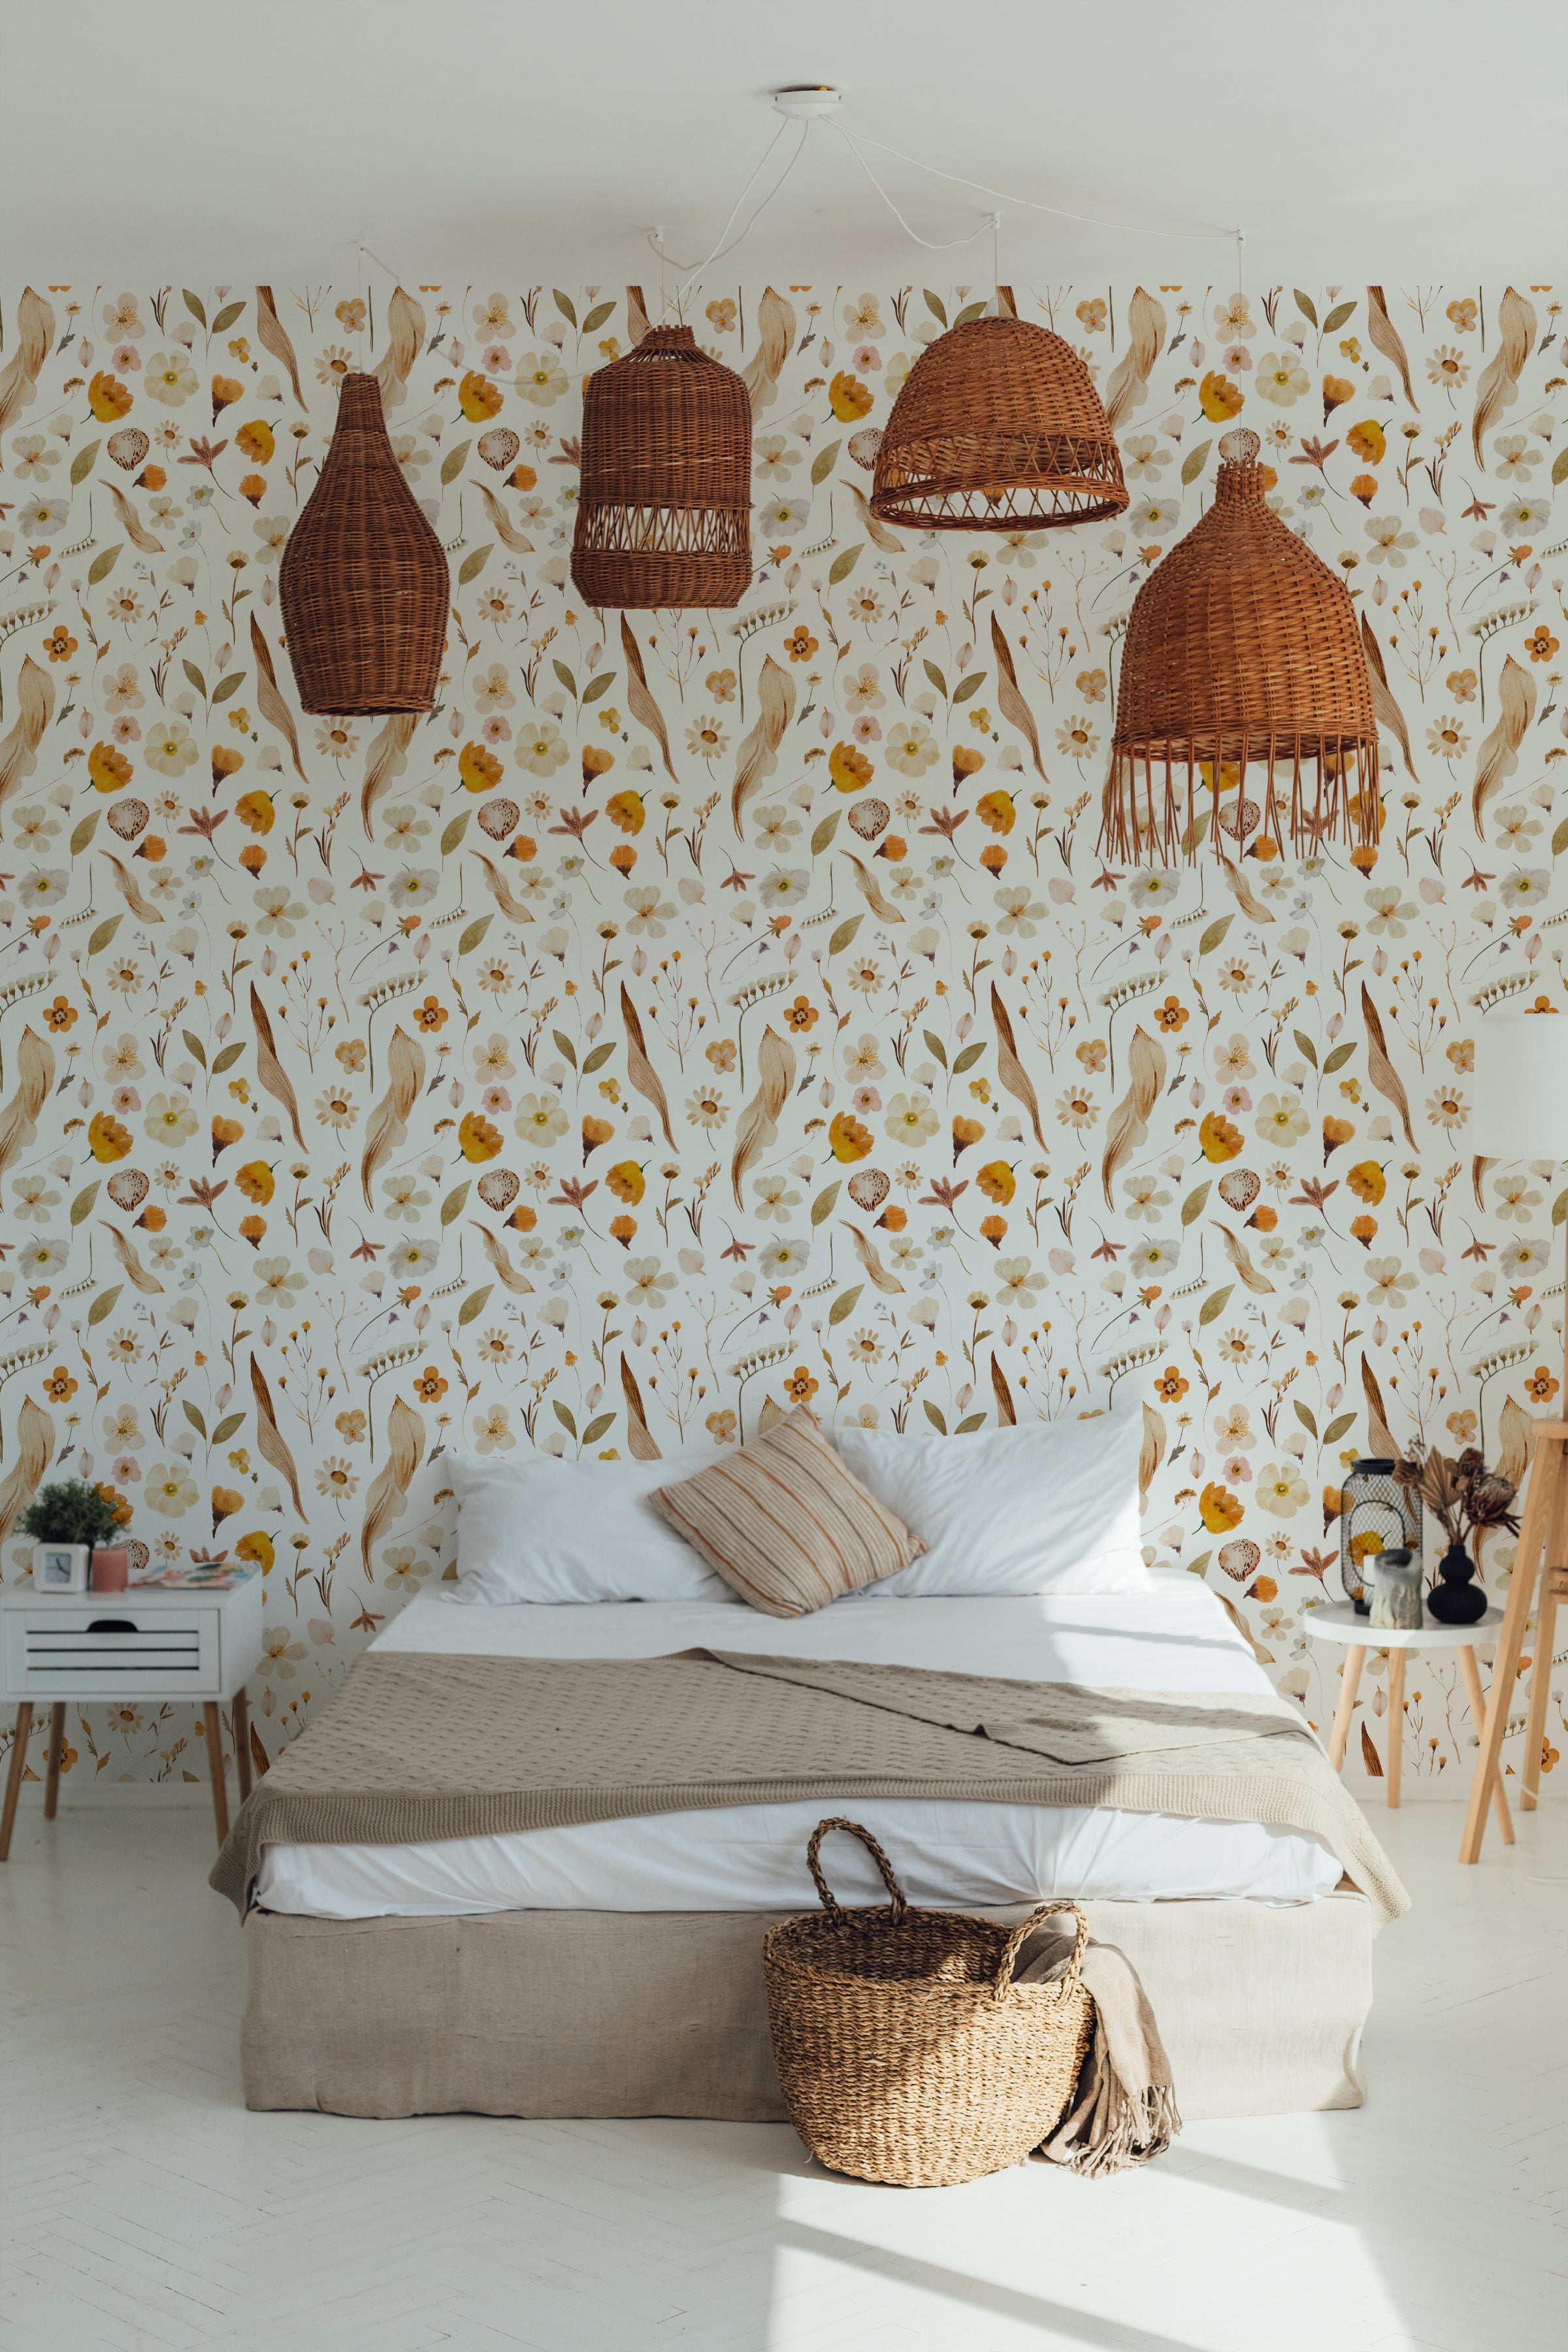 A serene bedroom featuring Boho Dreams Wallpaper adorned with a rich botanical pattern of flowers and leaves in warm earth tones. The room is accented with wicker pendant lamps, enhancing the natural, bohemian vibe.